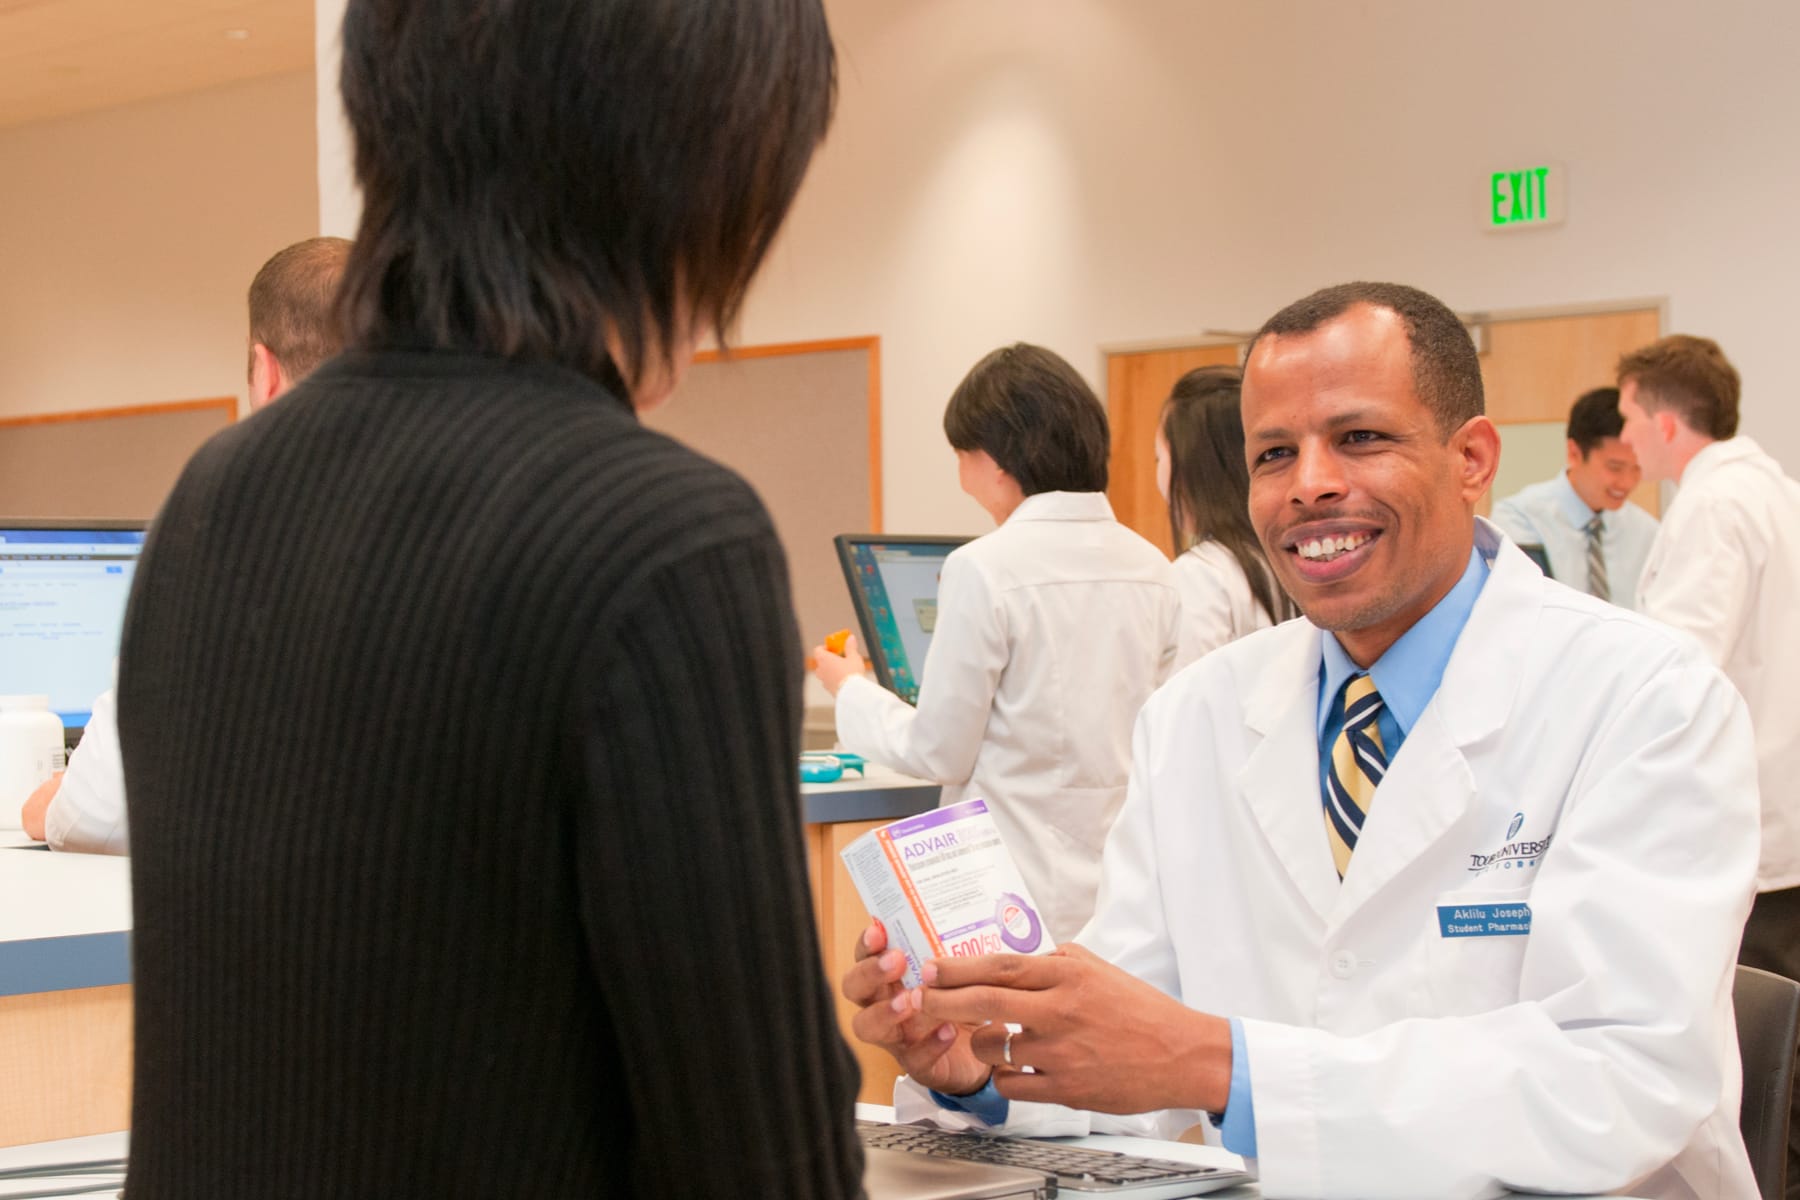 Pharmacy Student talking and smiling with a customer